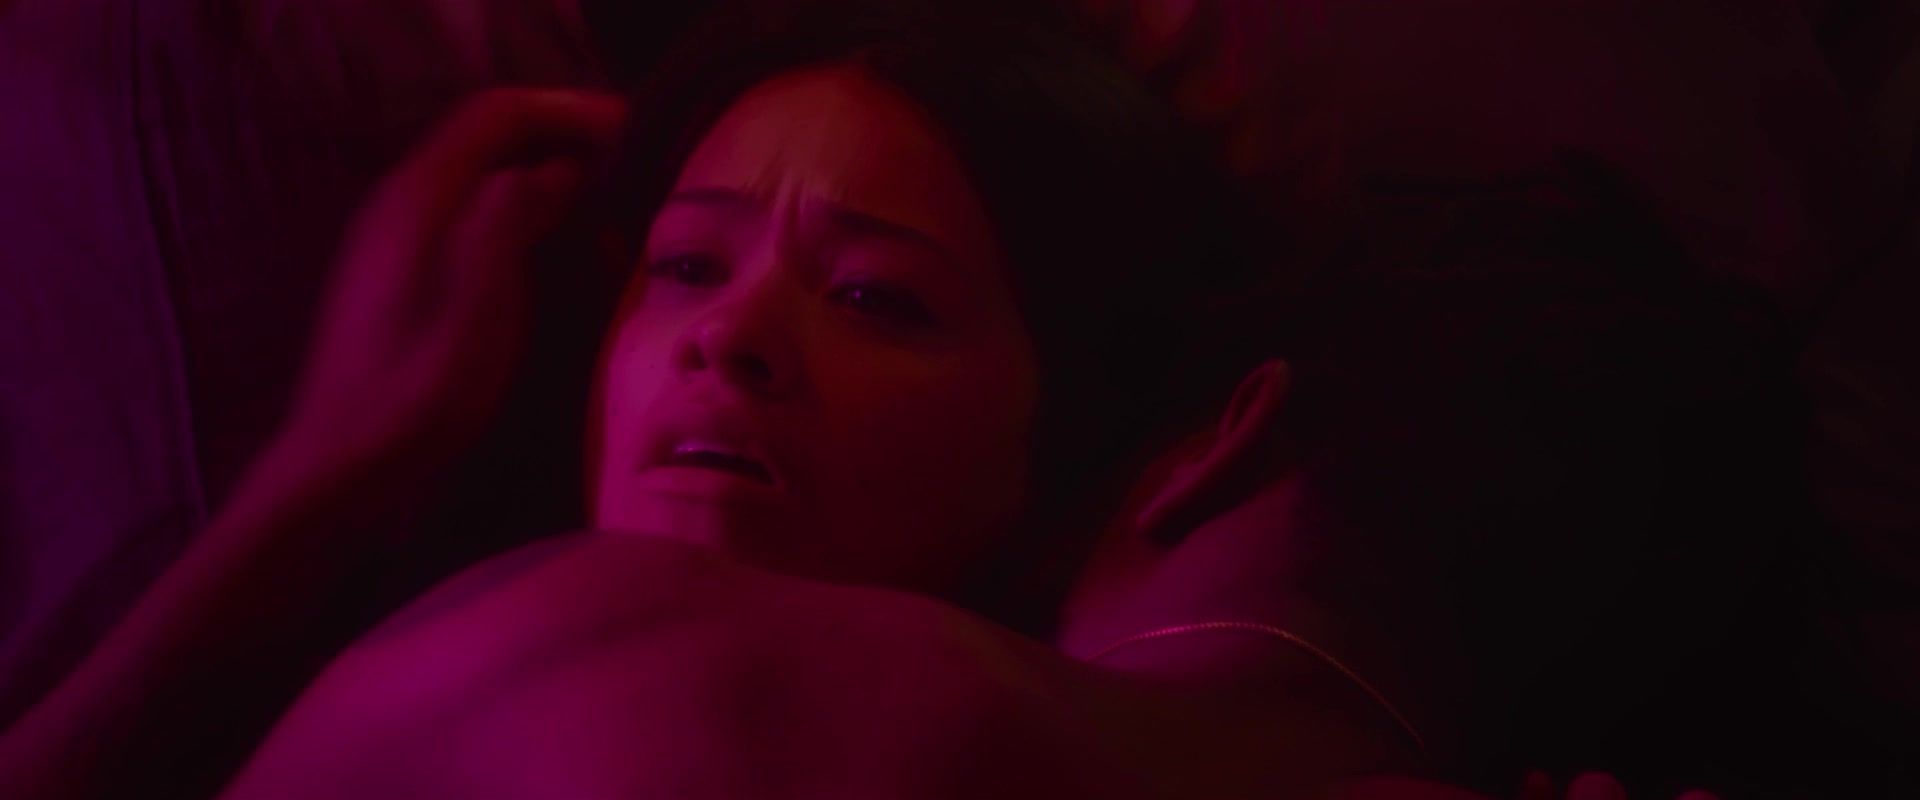 Tits Gina Rodriguez, Brittany Snow, DeWanda Wise nude - Someone Great (2019) Mexico